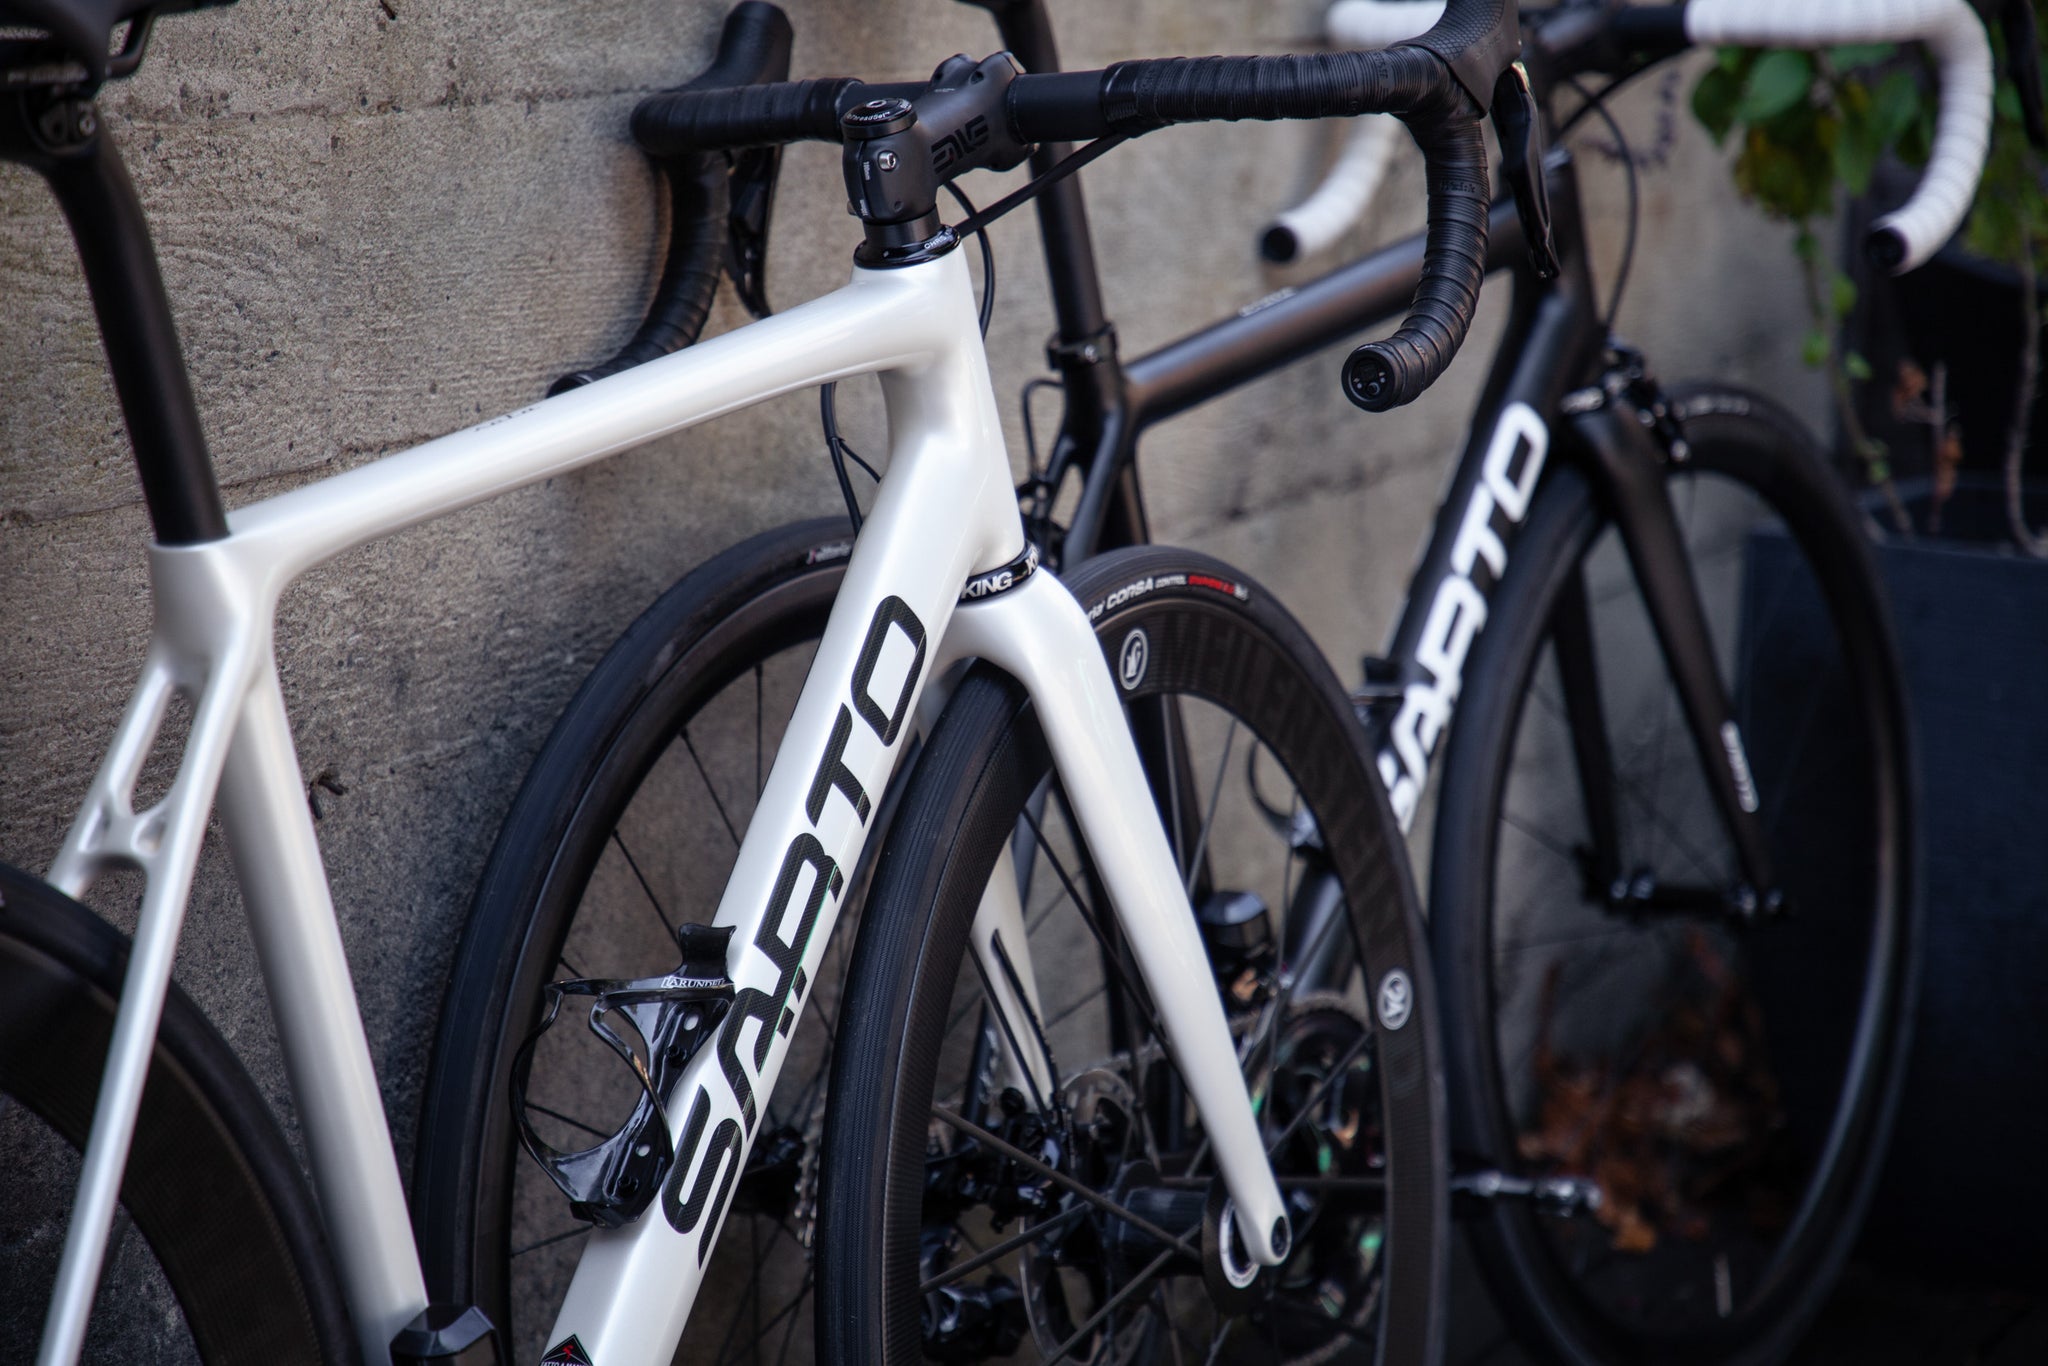 Bike(s) of the Week - A Sarto Double Feature